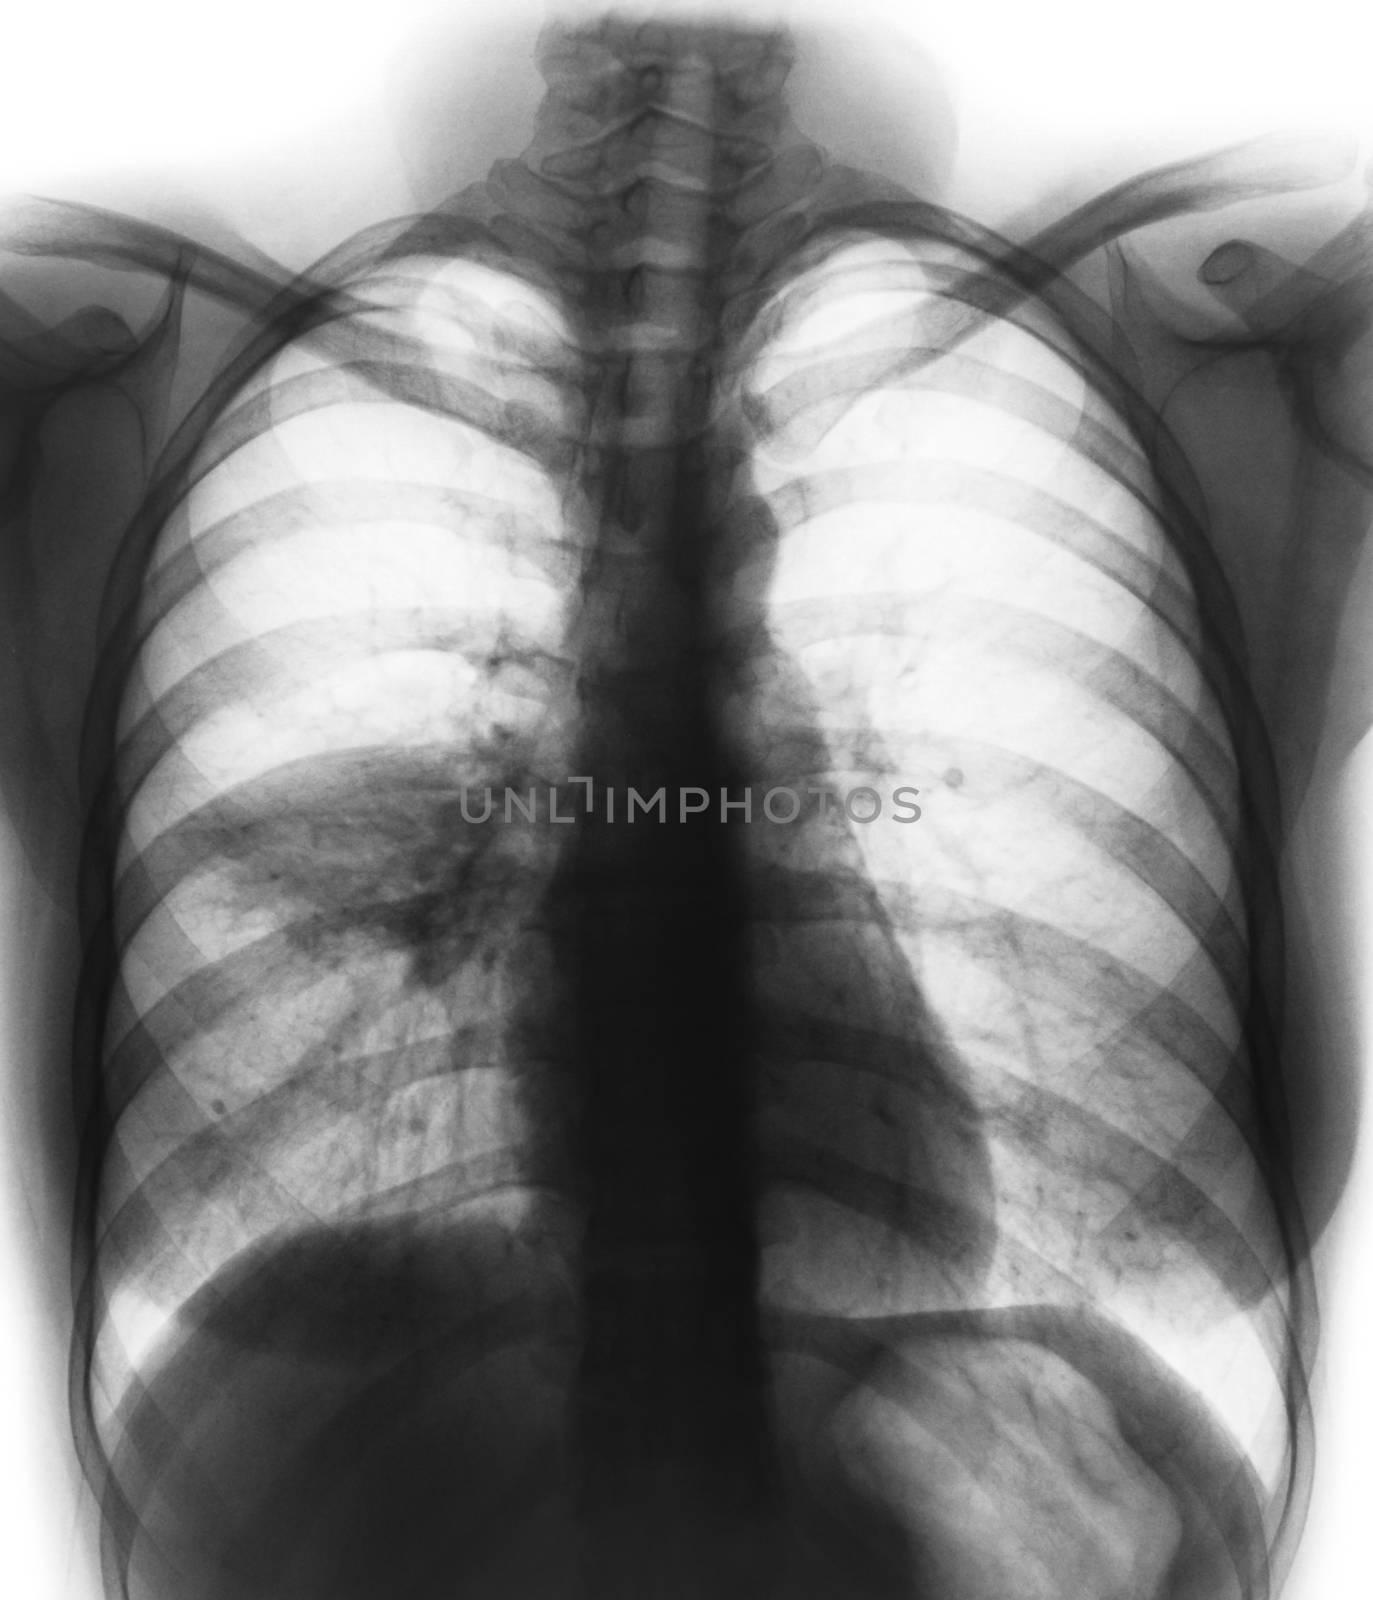 Pneumonia ( film chest x-ray show alveolar infiltrate at right middle lung ) by stockdevil